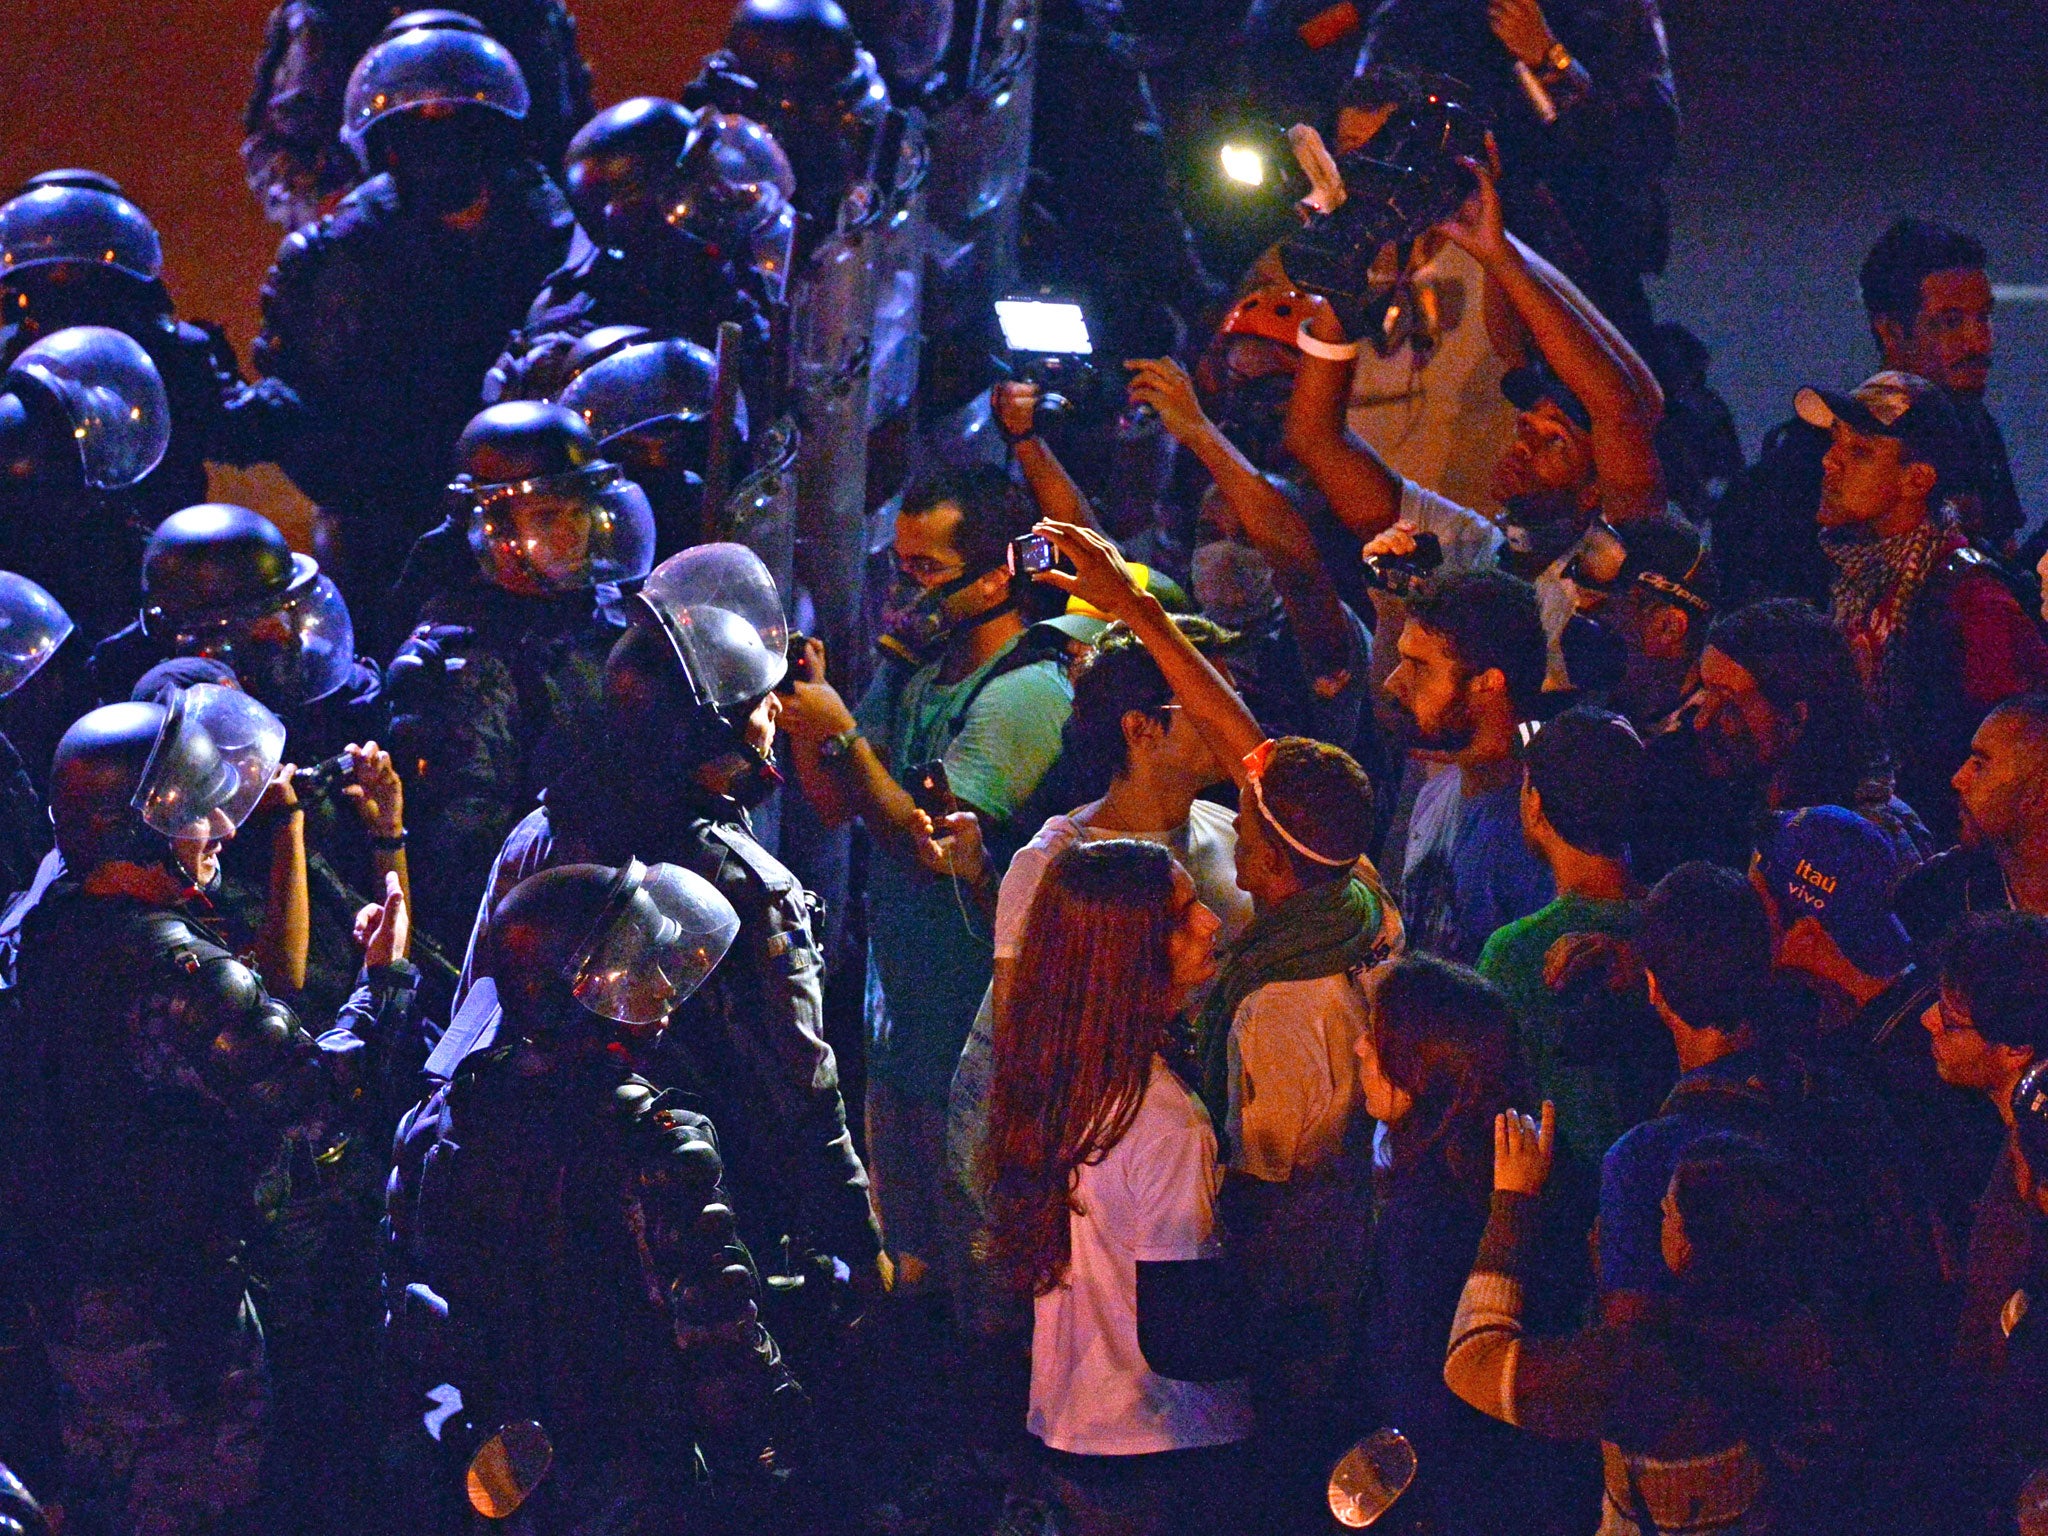 Riot police and protesters face-off near the Maracana Stadium during the Confederations Cup